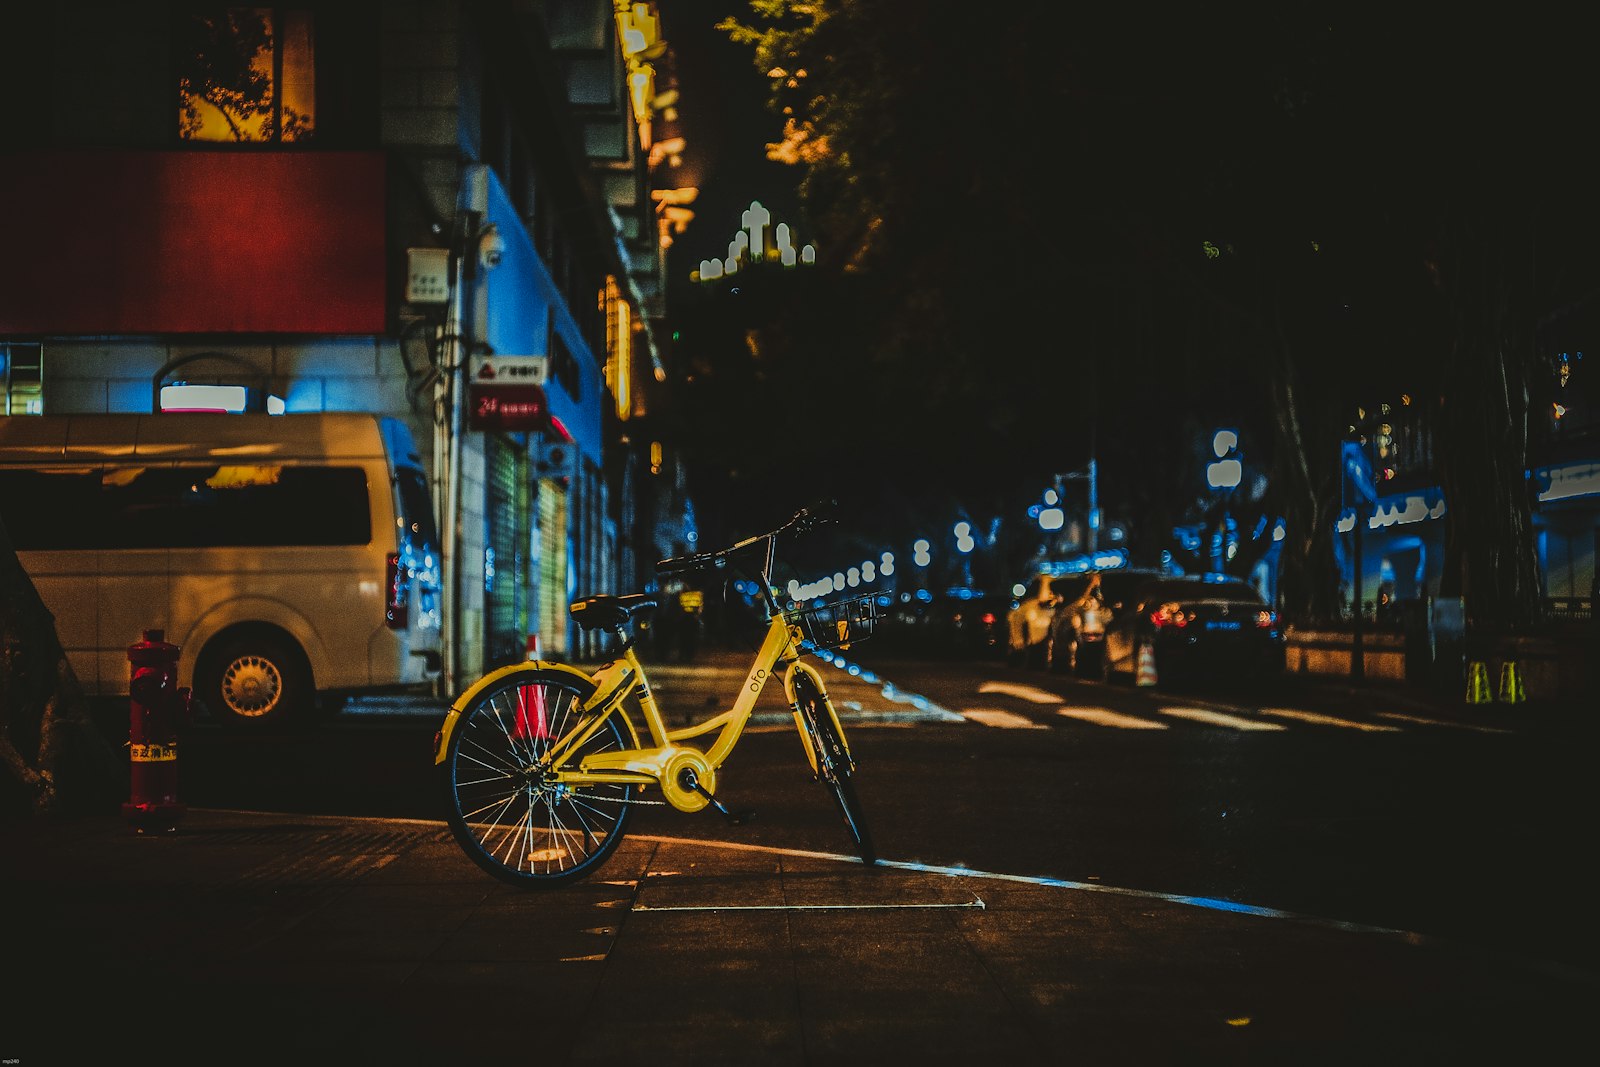 Summilux-M 1:1.4/50 sample photo. Yellow bicycle park beside photography